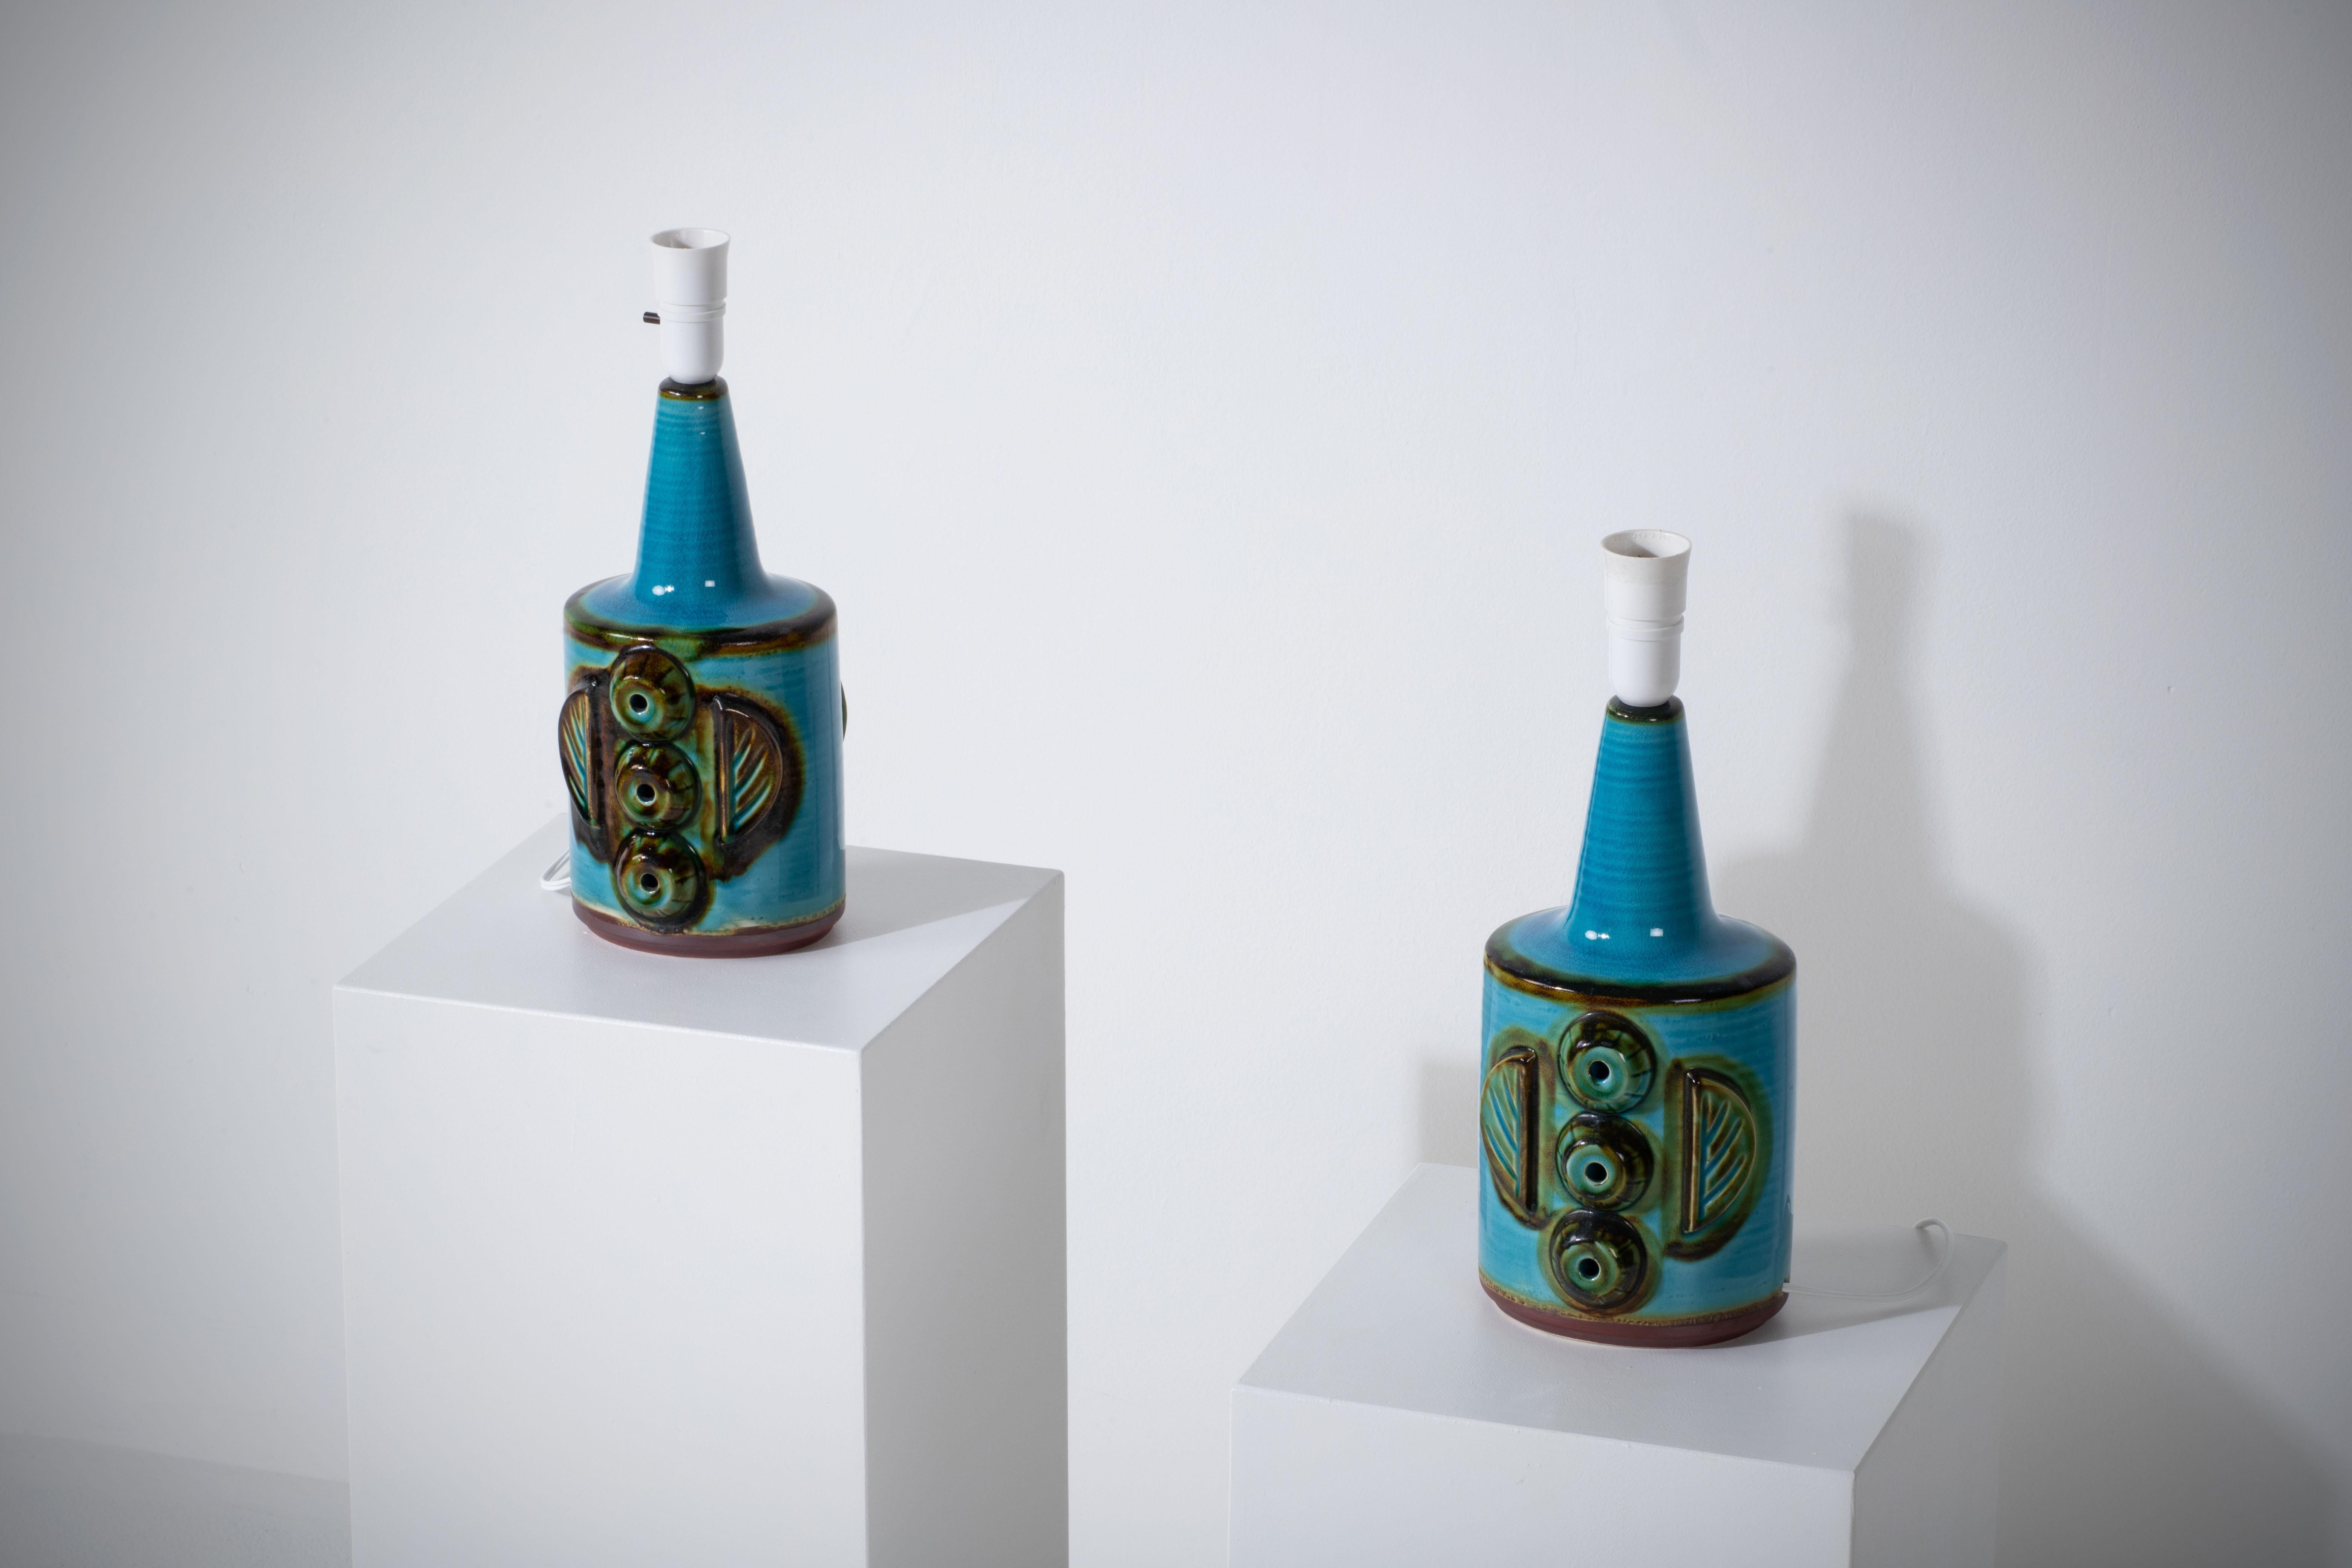 Pair of Turquoise Søholm Table Lamps by Einar Johansen, Denmark, 1960s For Sale 3